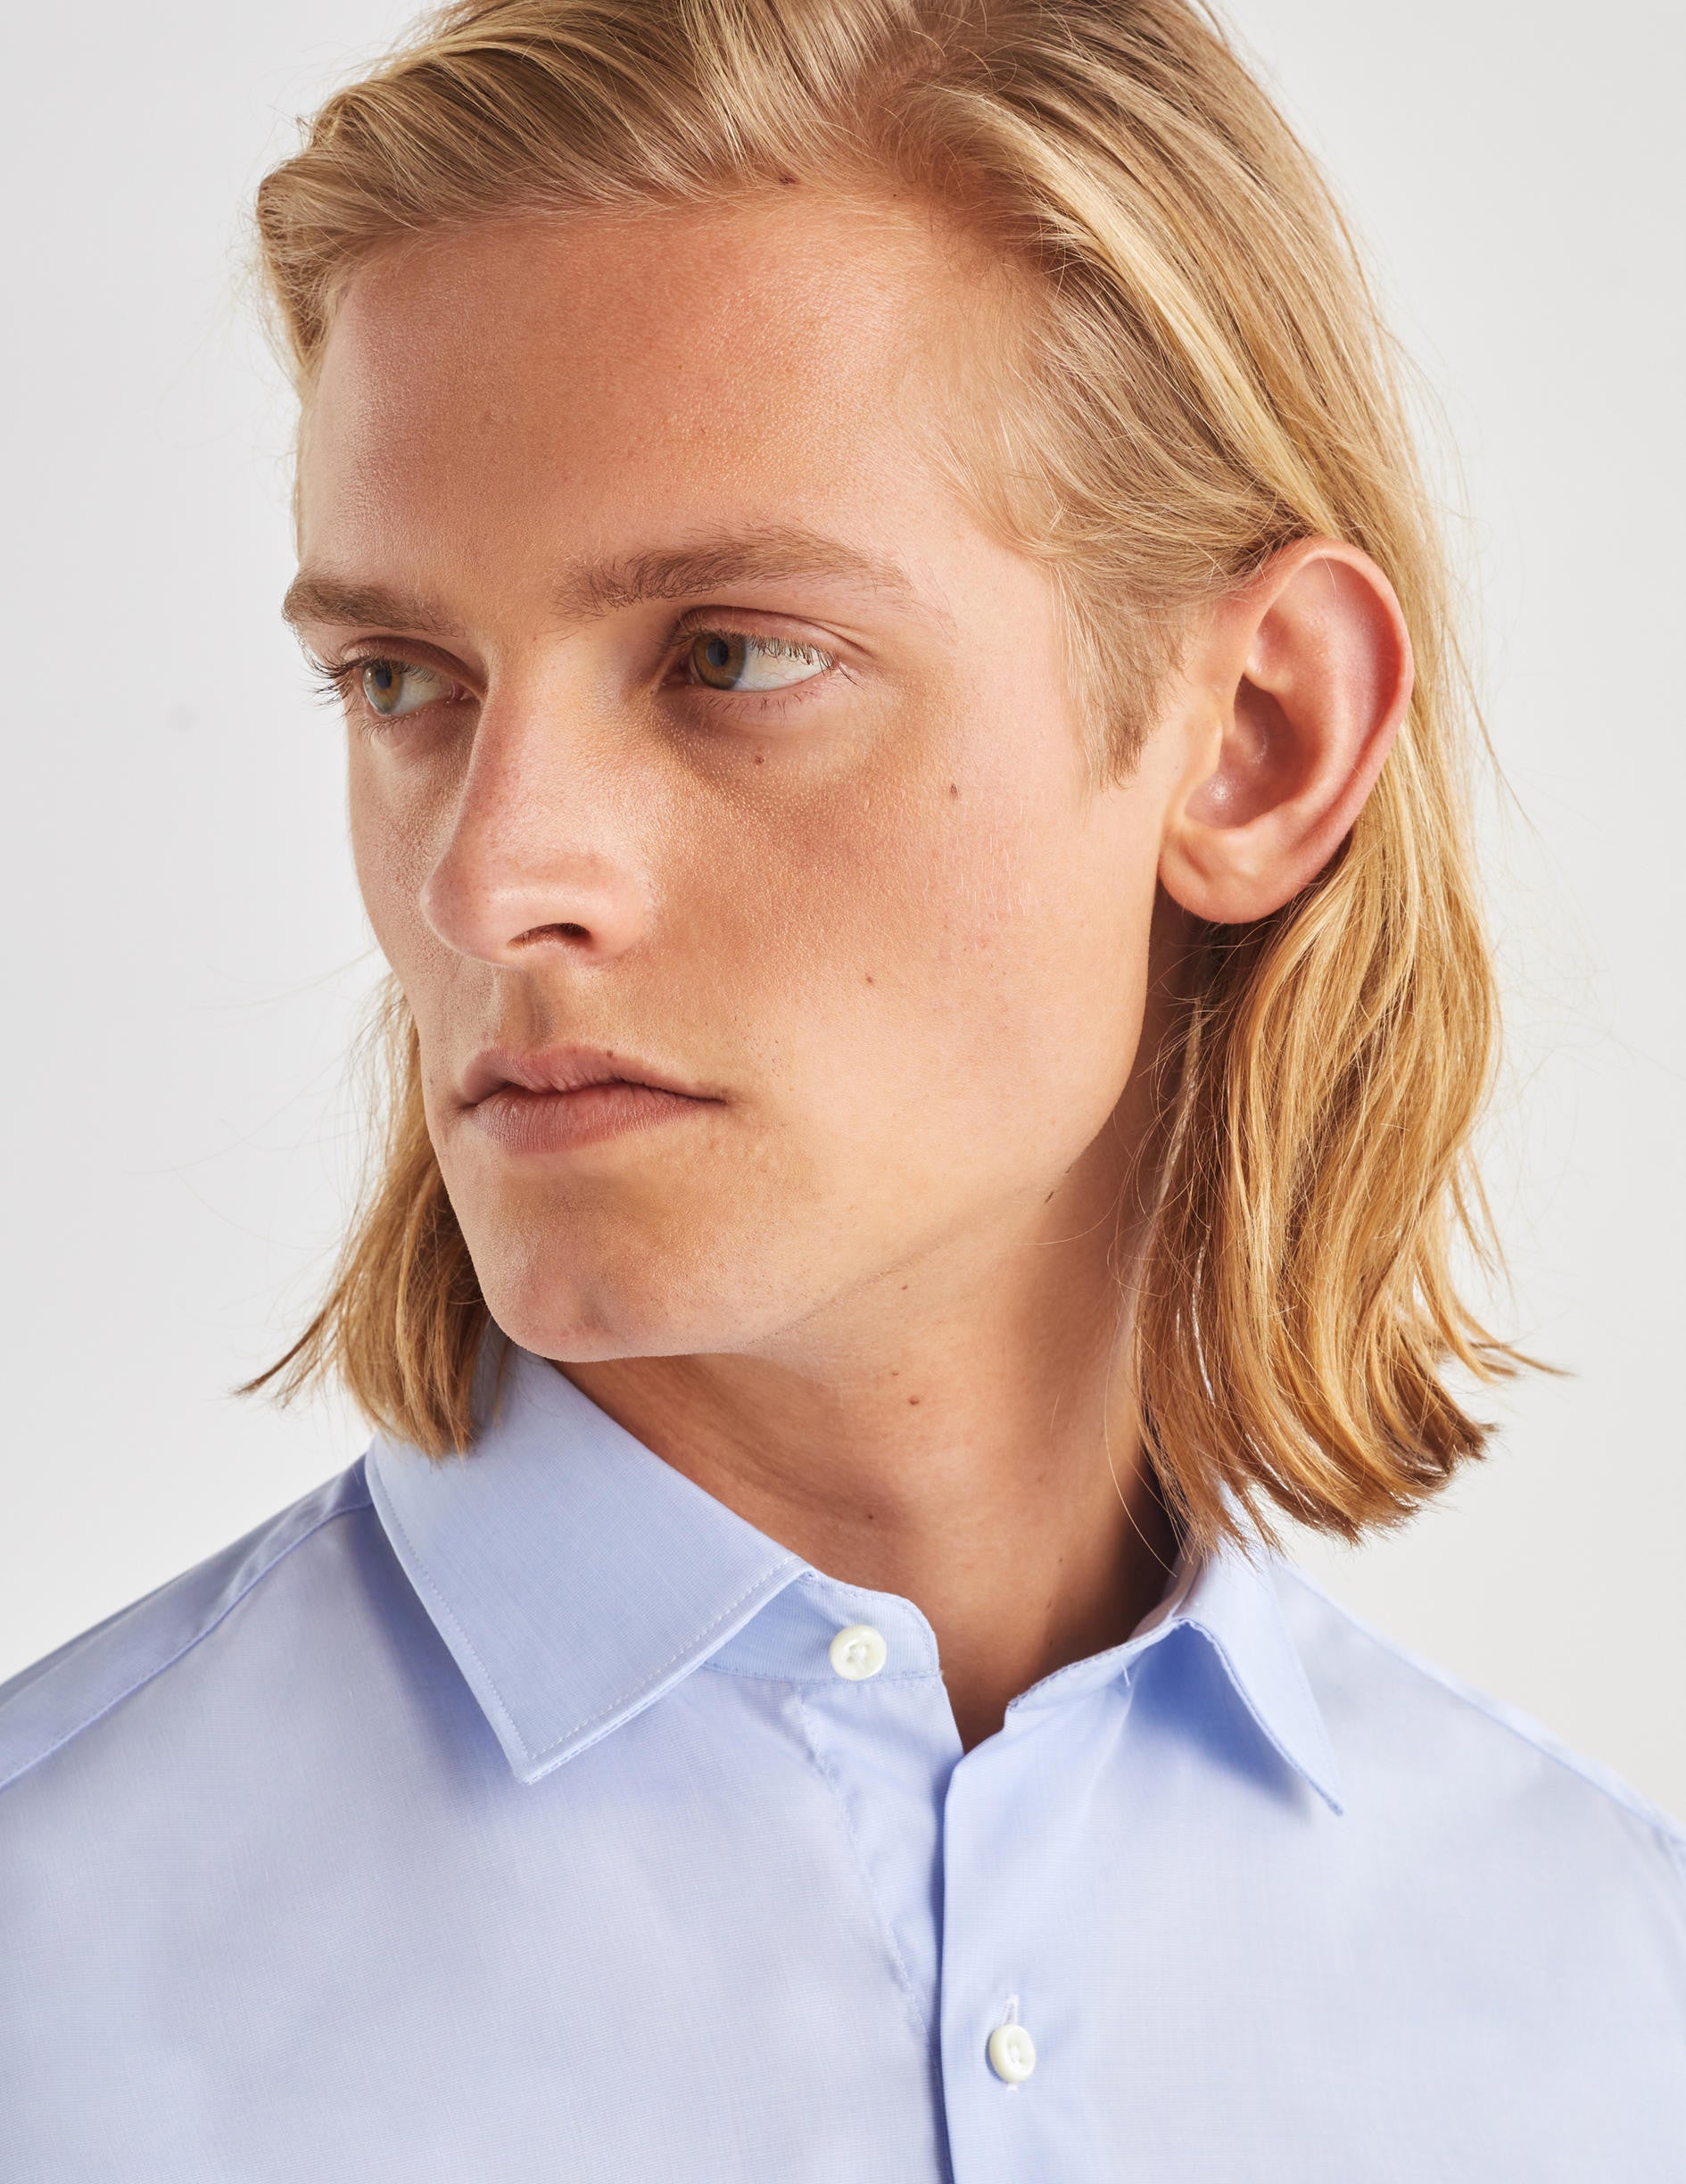 Fitted blue wrinkle-free shirt - Wire to wire - Figaret Collar